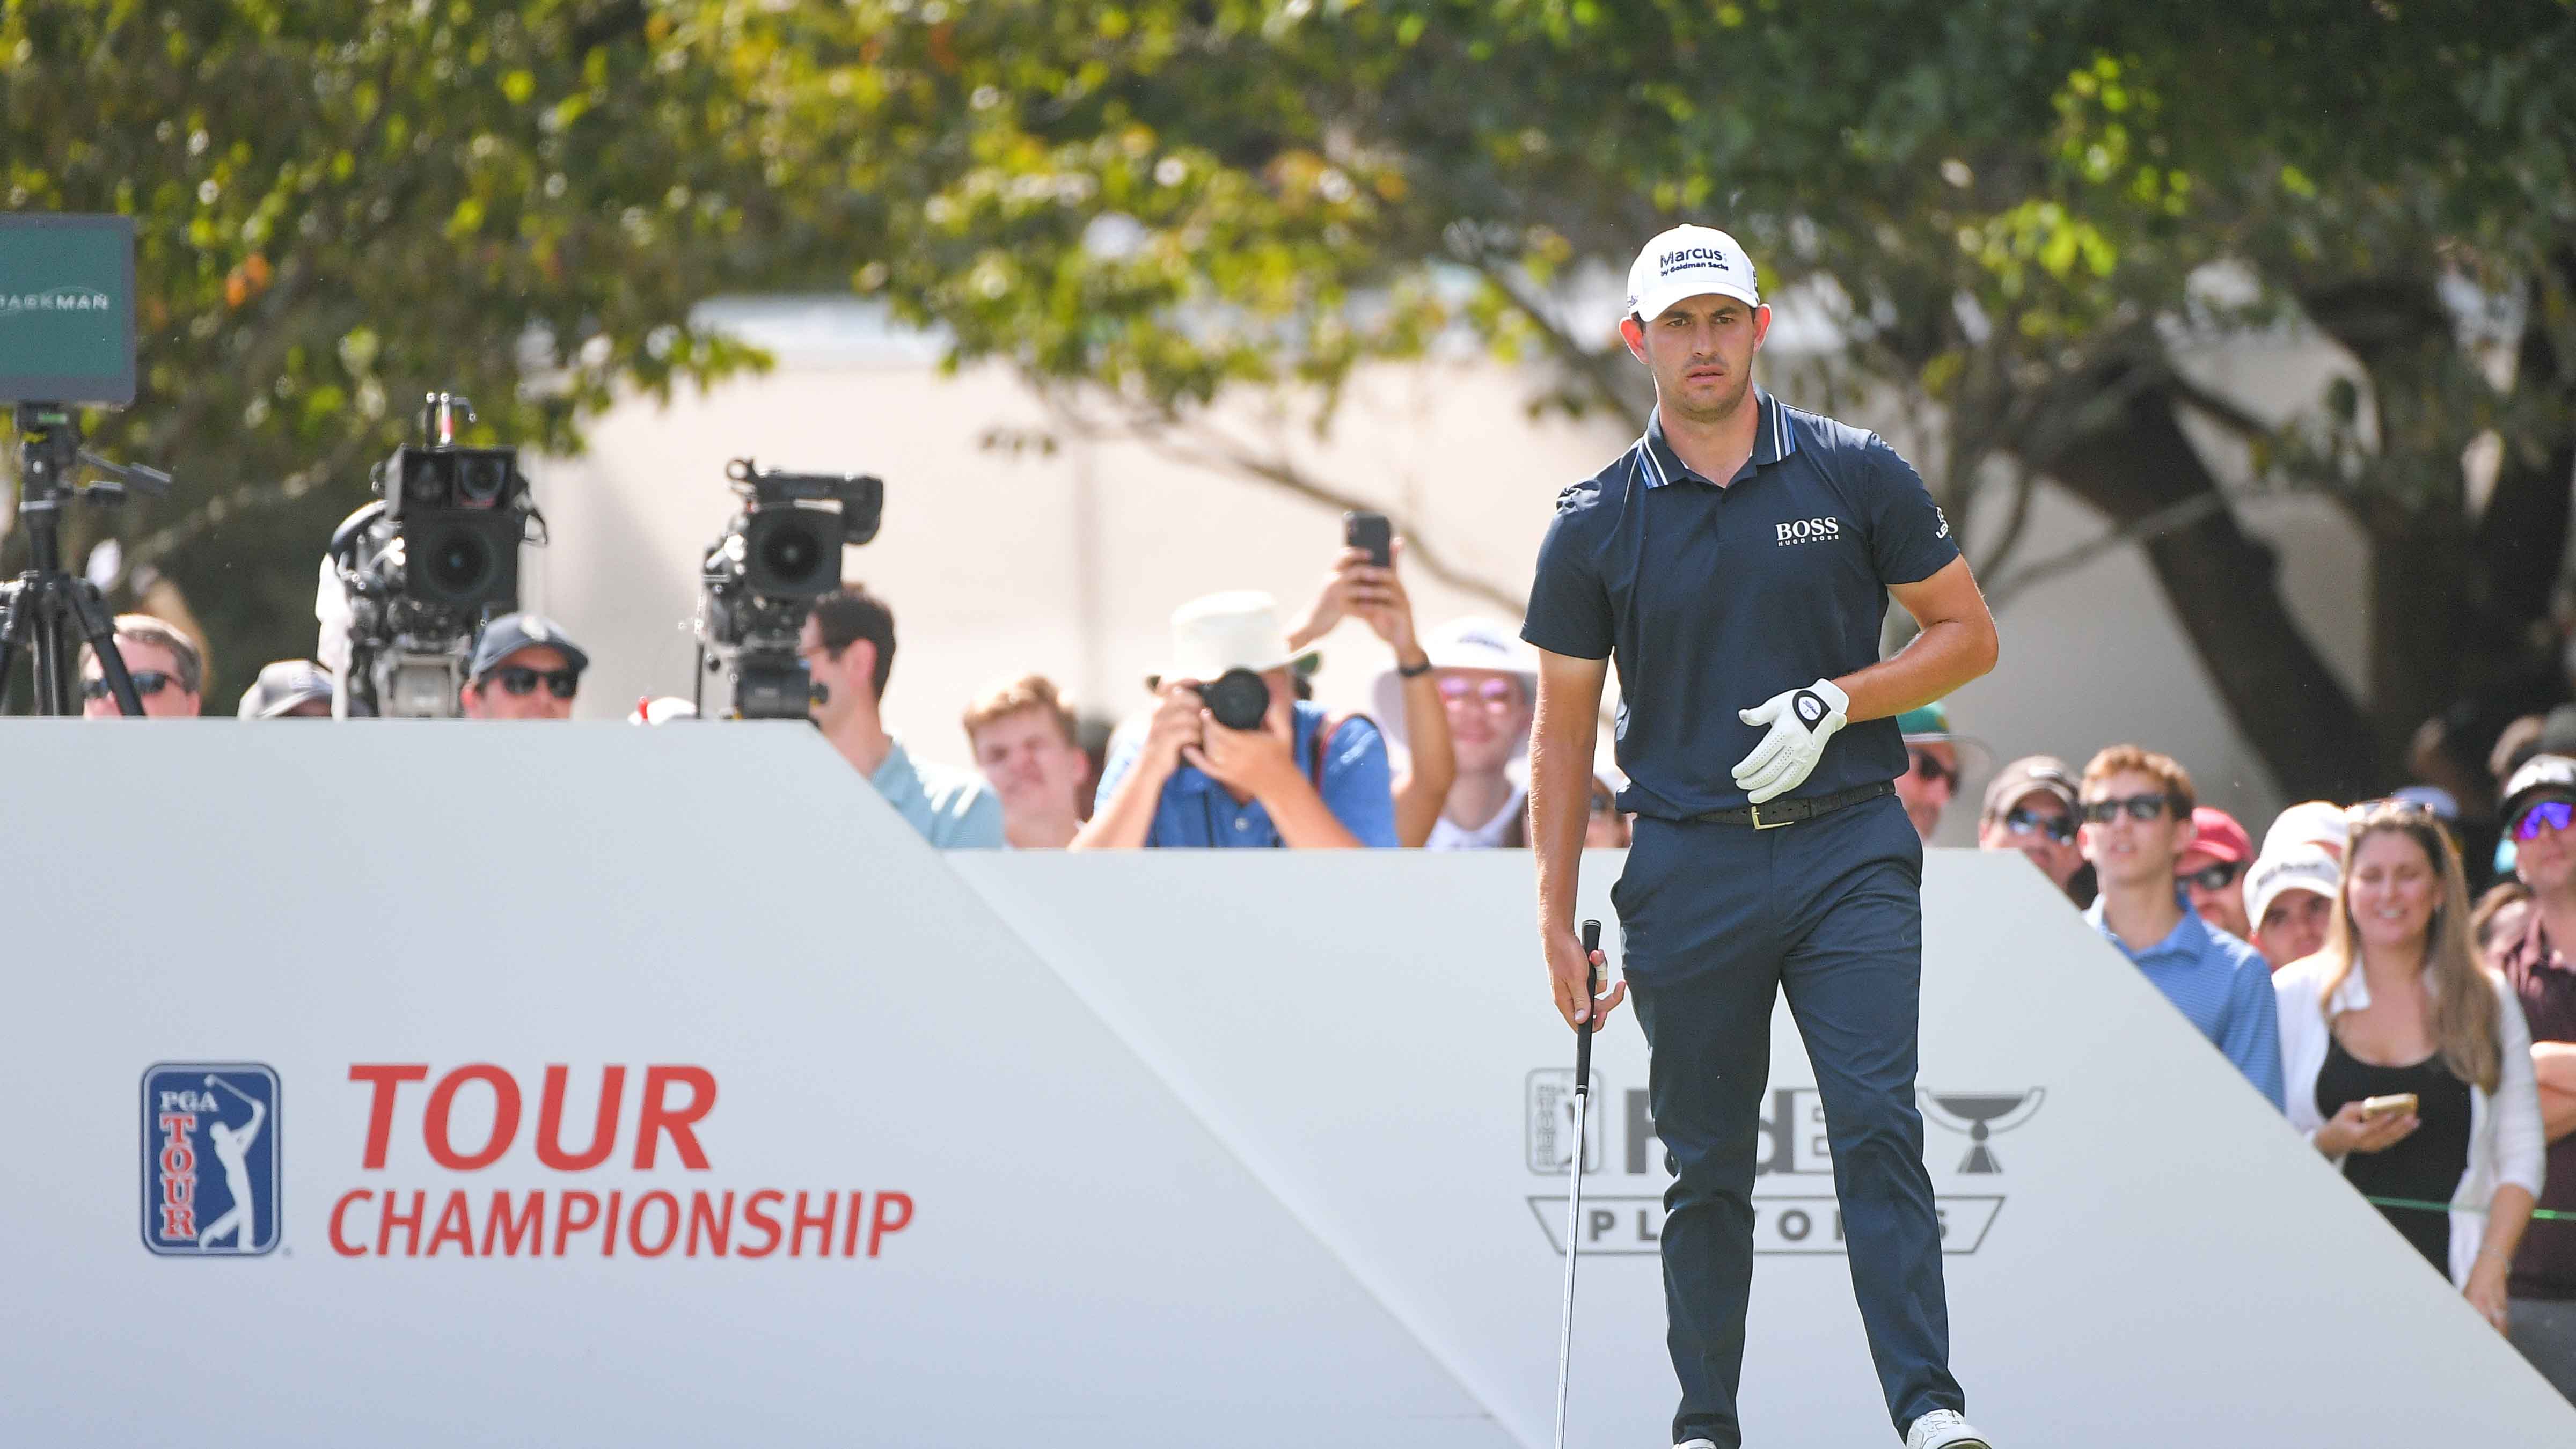 2022 Tour Championship How to watch, TV schedule, tee times